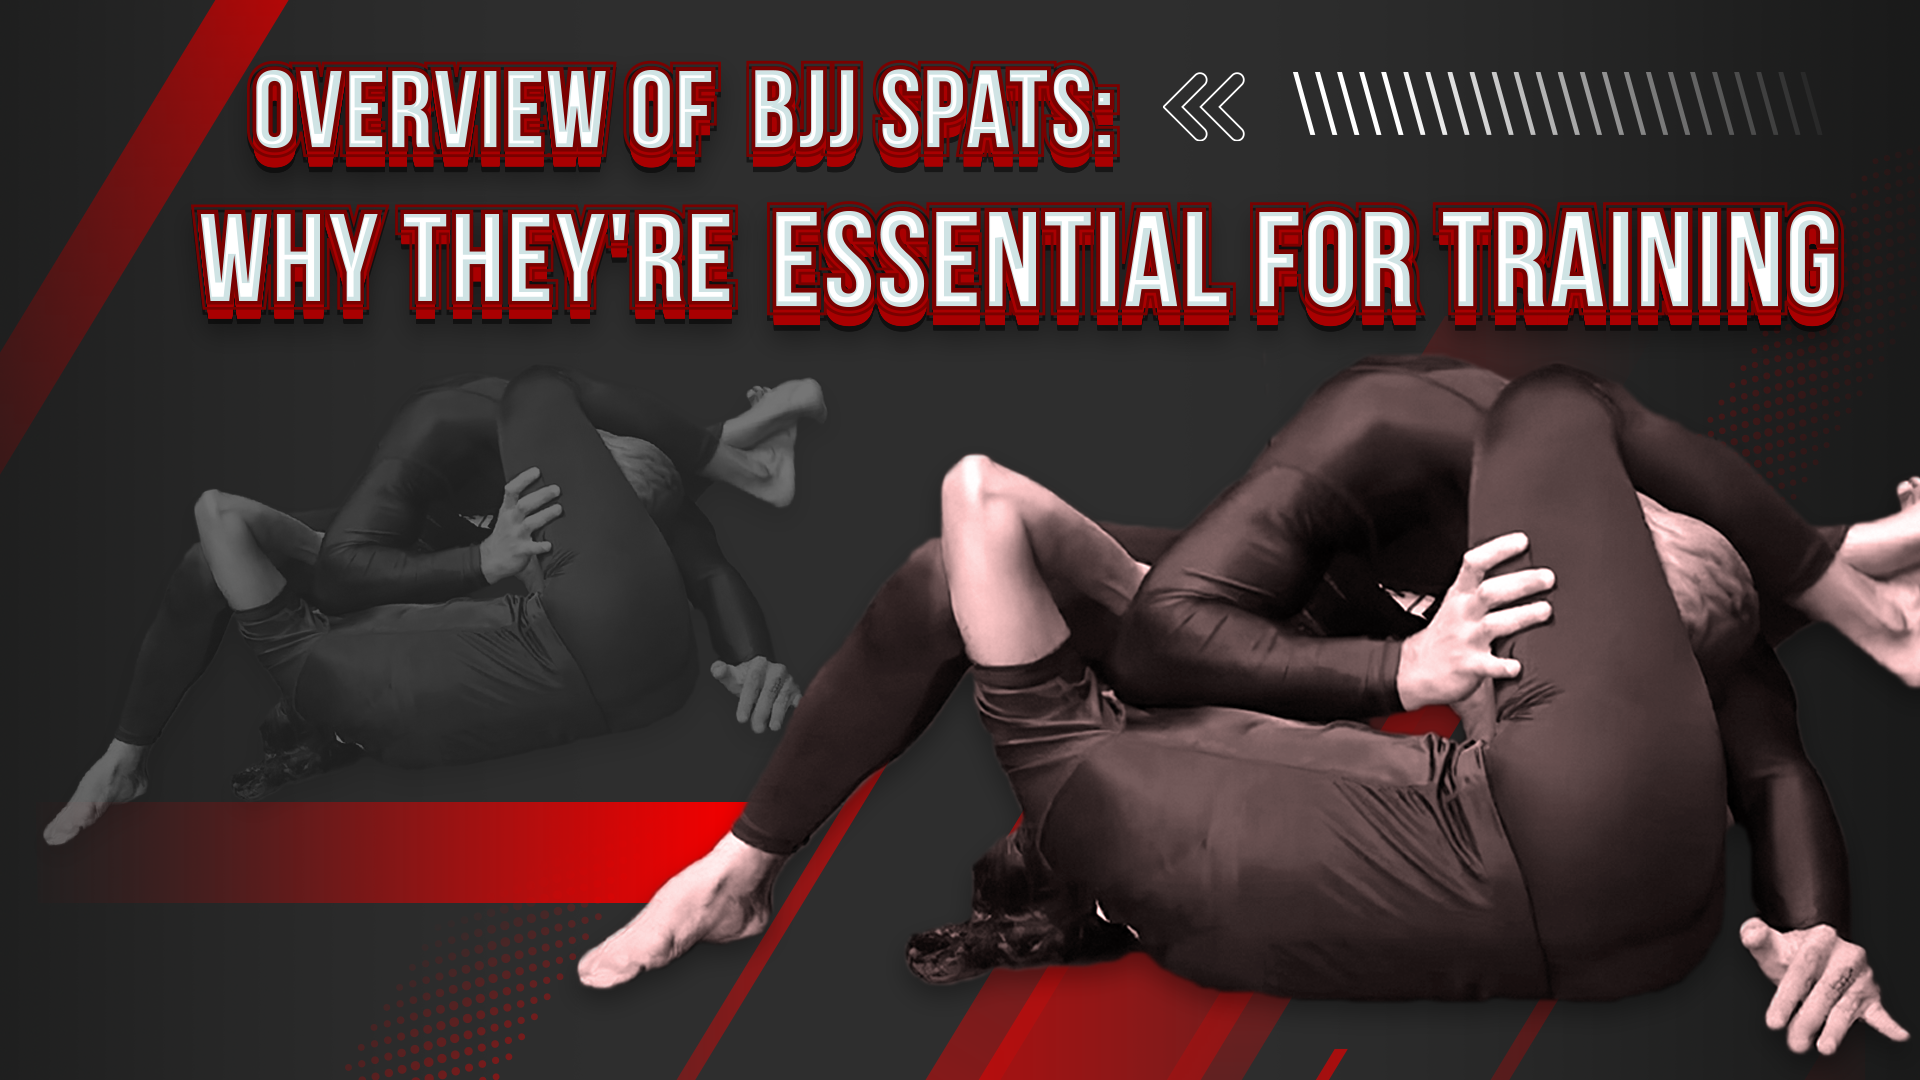 Overview of BJJ Spats: Why They're Essential for Training